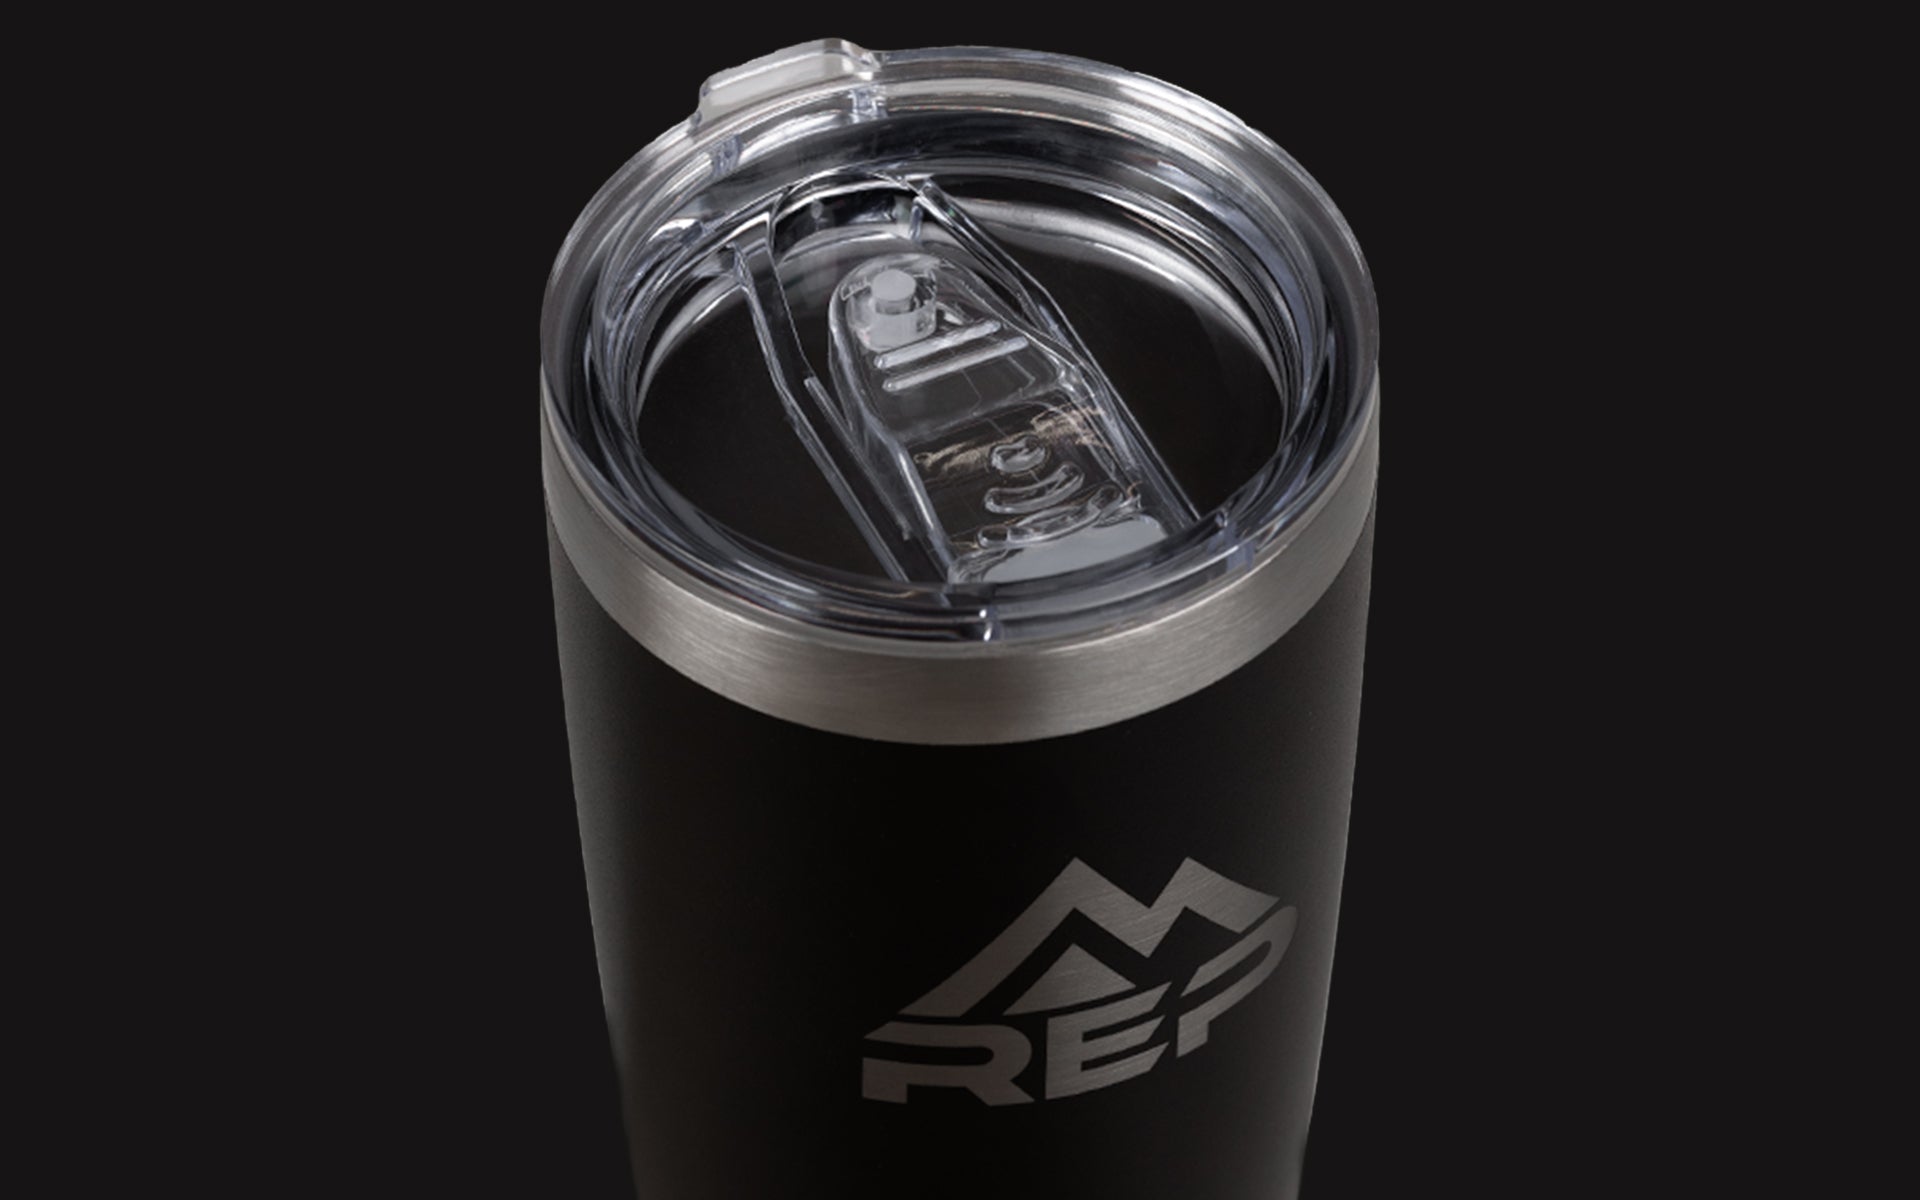 REP Tumbler with clear polycarbonate lid